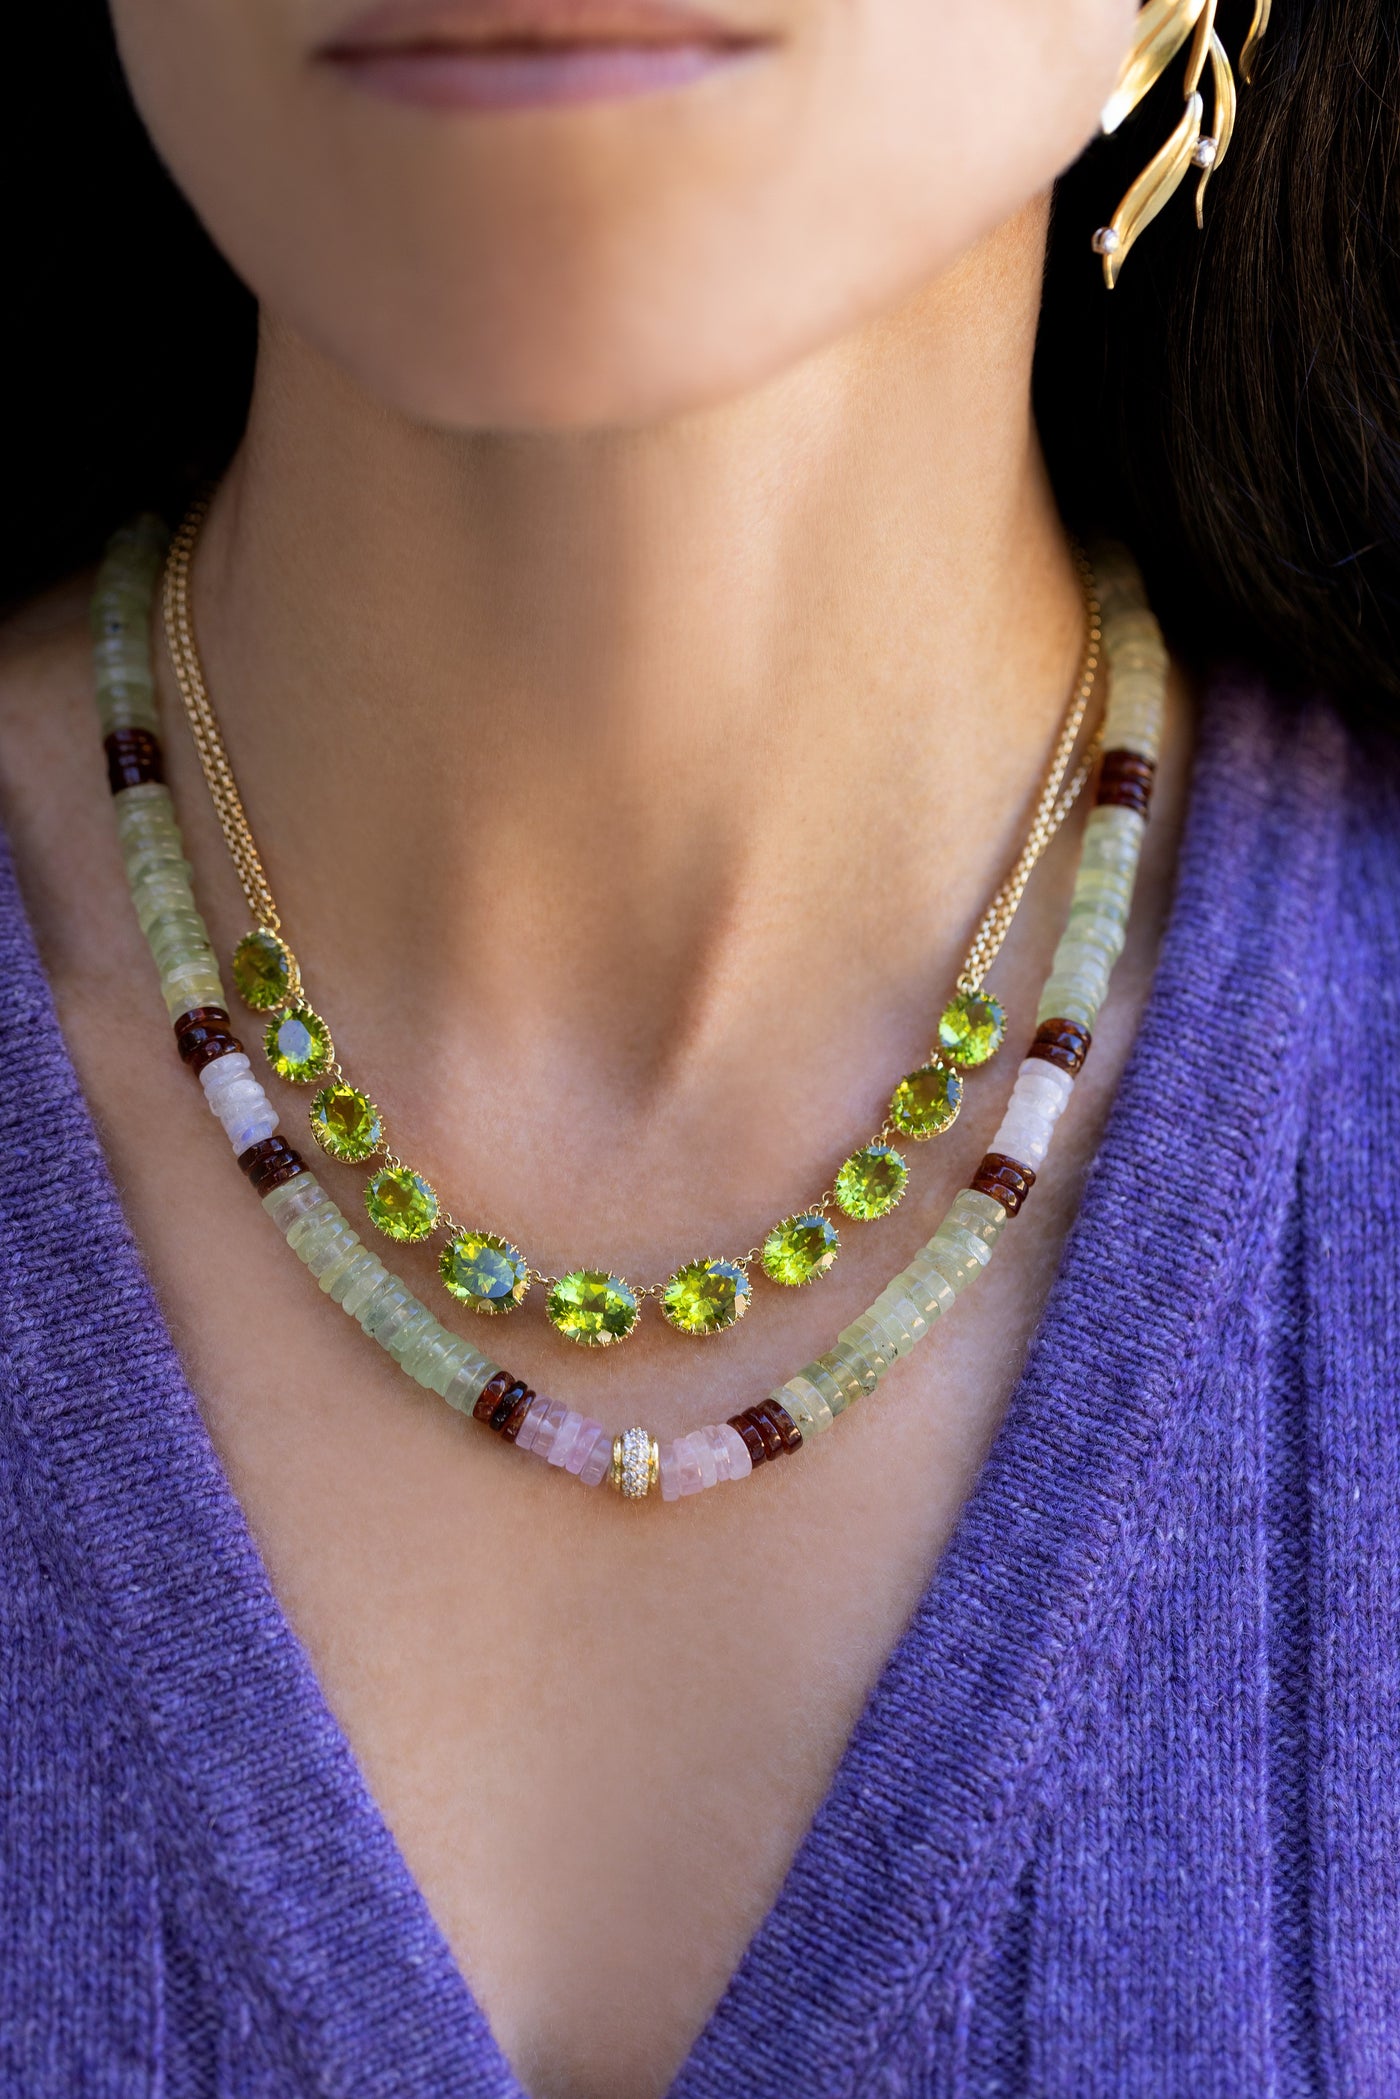 Rose Quartz, Green Quartz, and Tiger's Eye Beaded Necklace on Leather